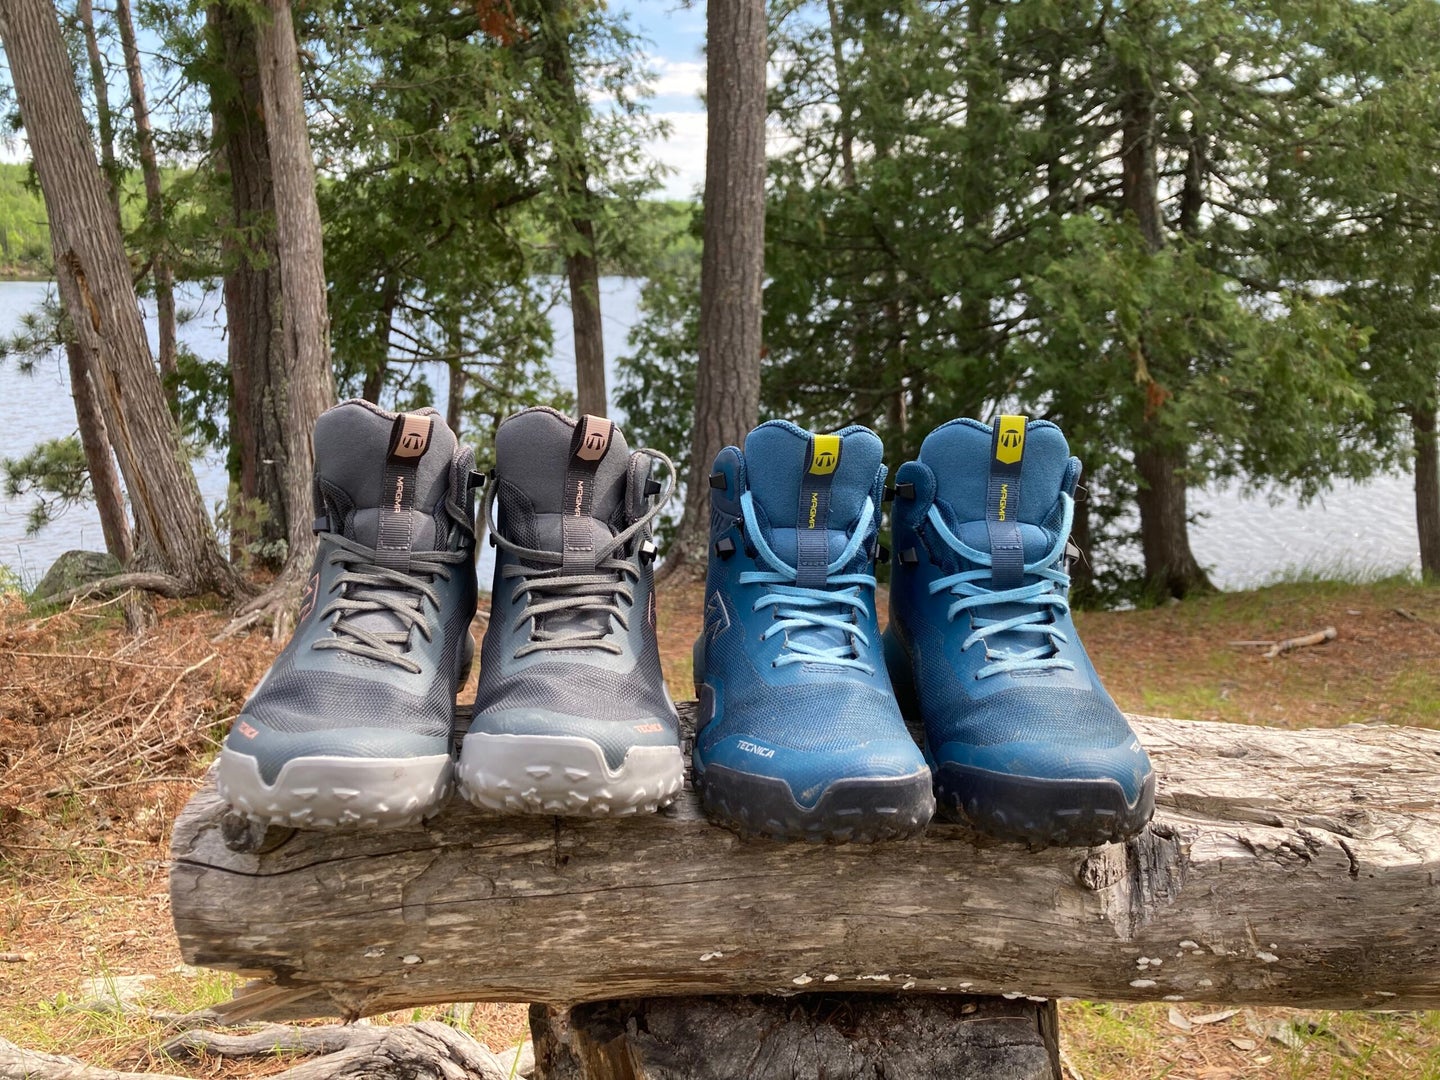 6 Best Gore-Tex Hiking Shoes